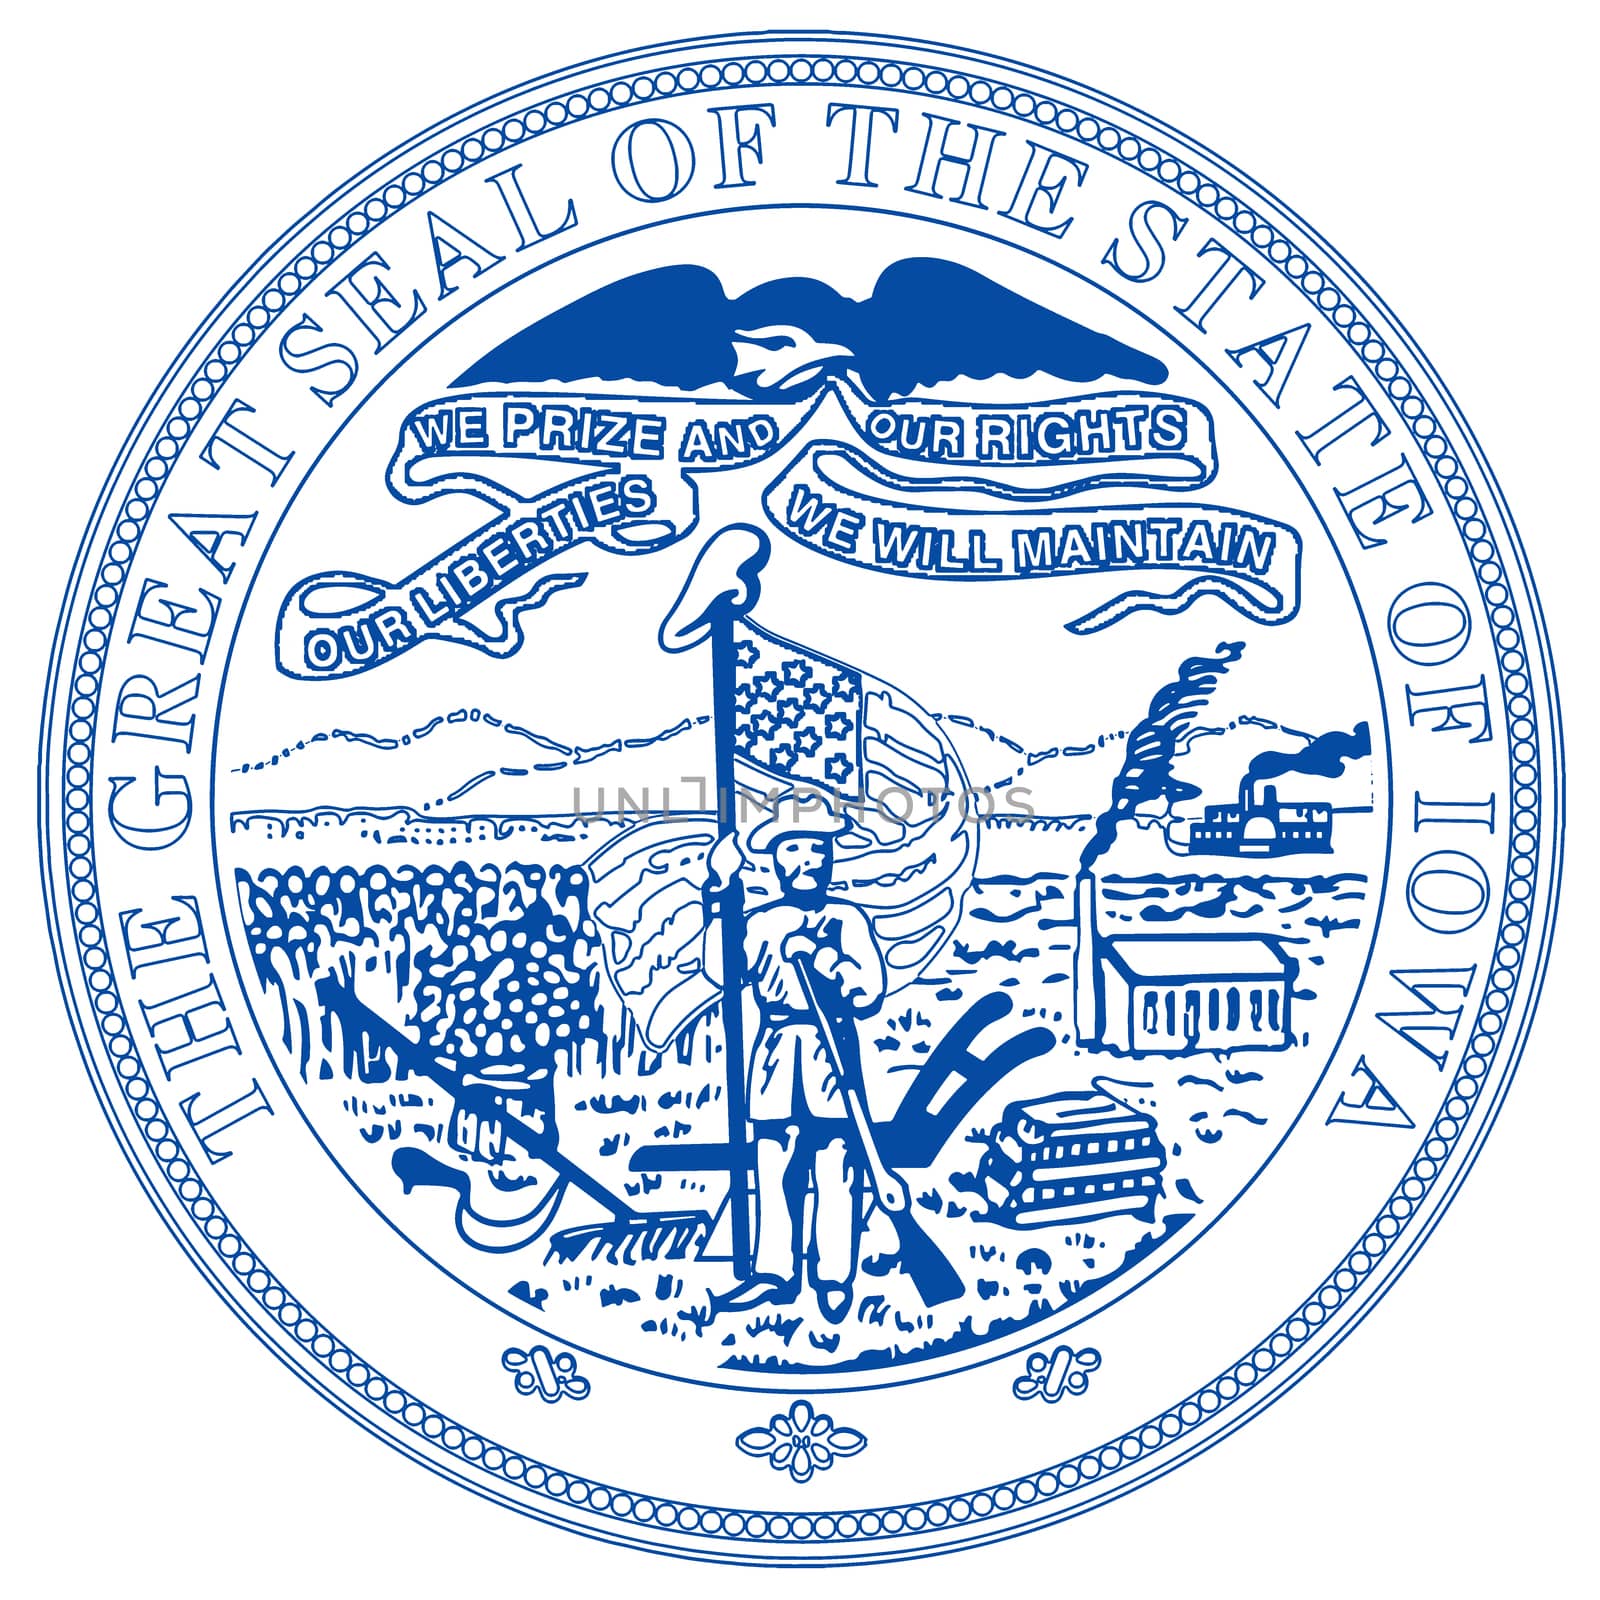 The great seal of the state of Iowa over a white background